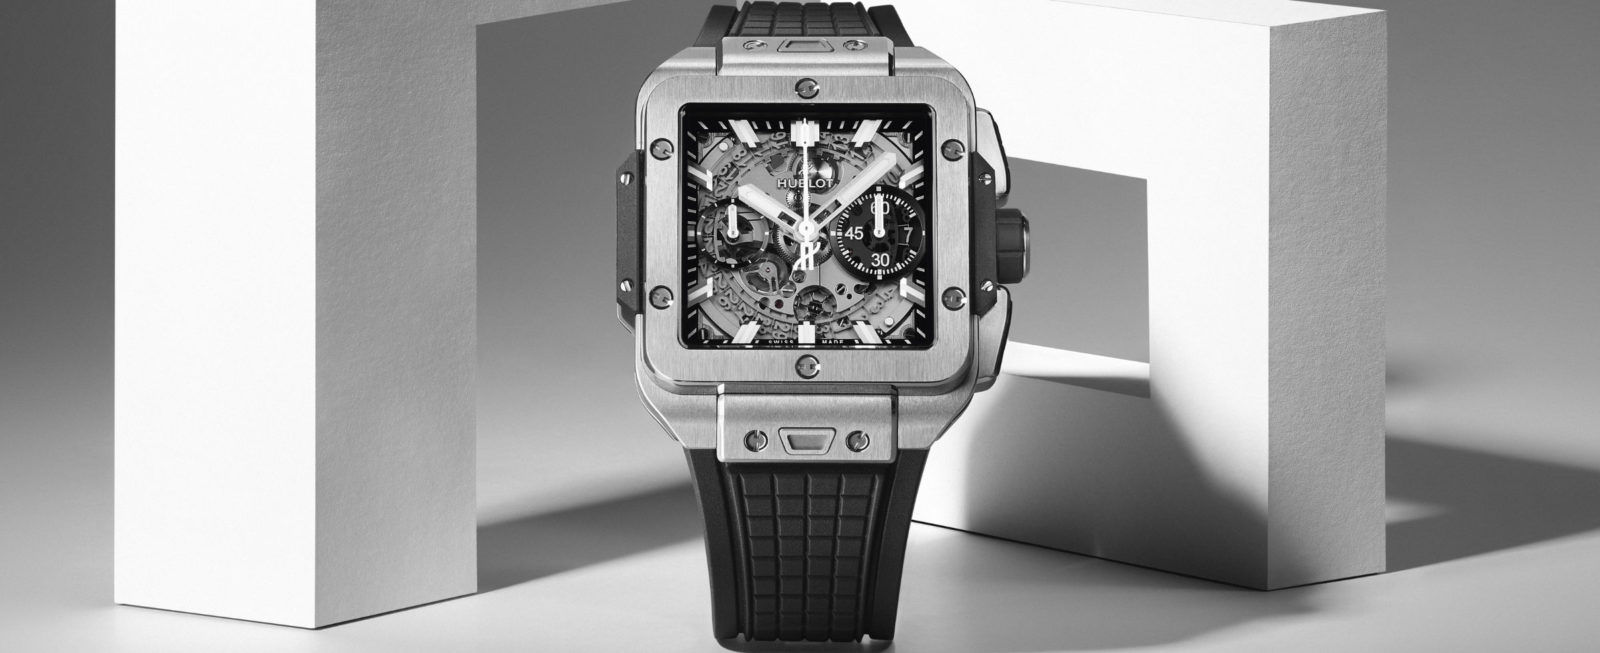 Watches and Wonders 2022: Hublot debuts its first square watch